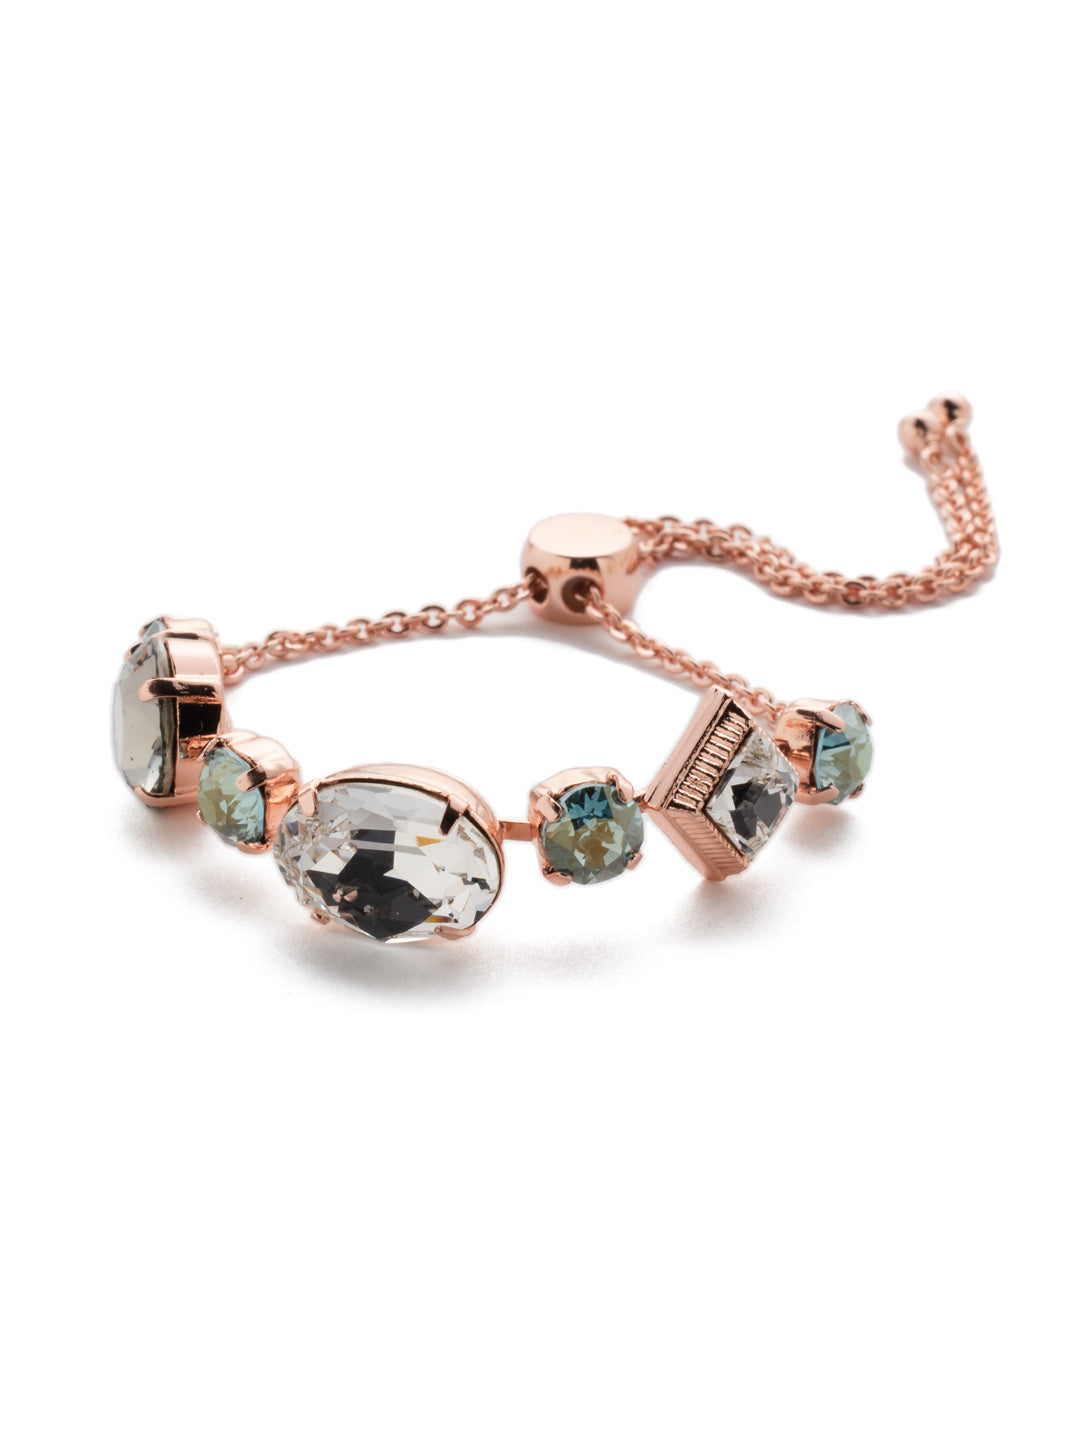 Primavera Slider Bracelet - BEA29RGCAZ - A variety of unique, beautiful crystals adorn our charming Primavera classic bracelet, with a delicate chain that can be adjusted to fit every wrist perfectly. From Sorrelli's Crystal Azure collection in our Rose Gold-tone finish.